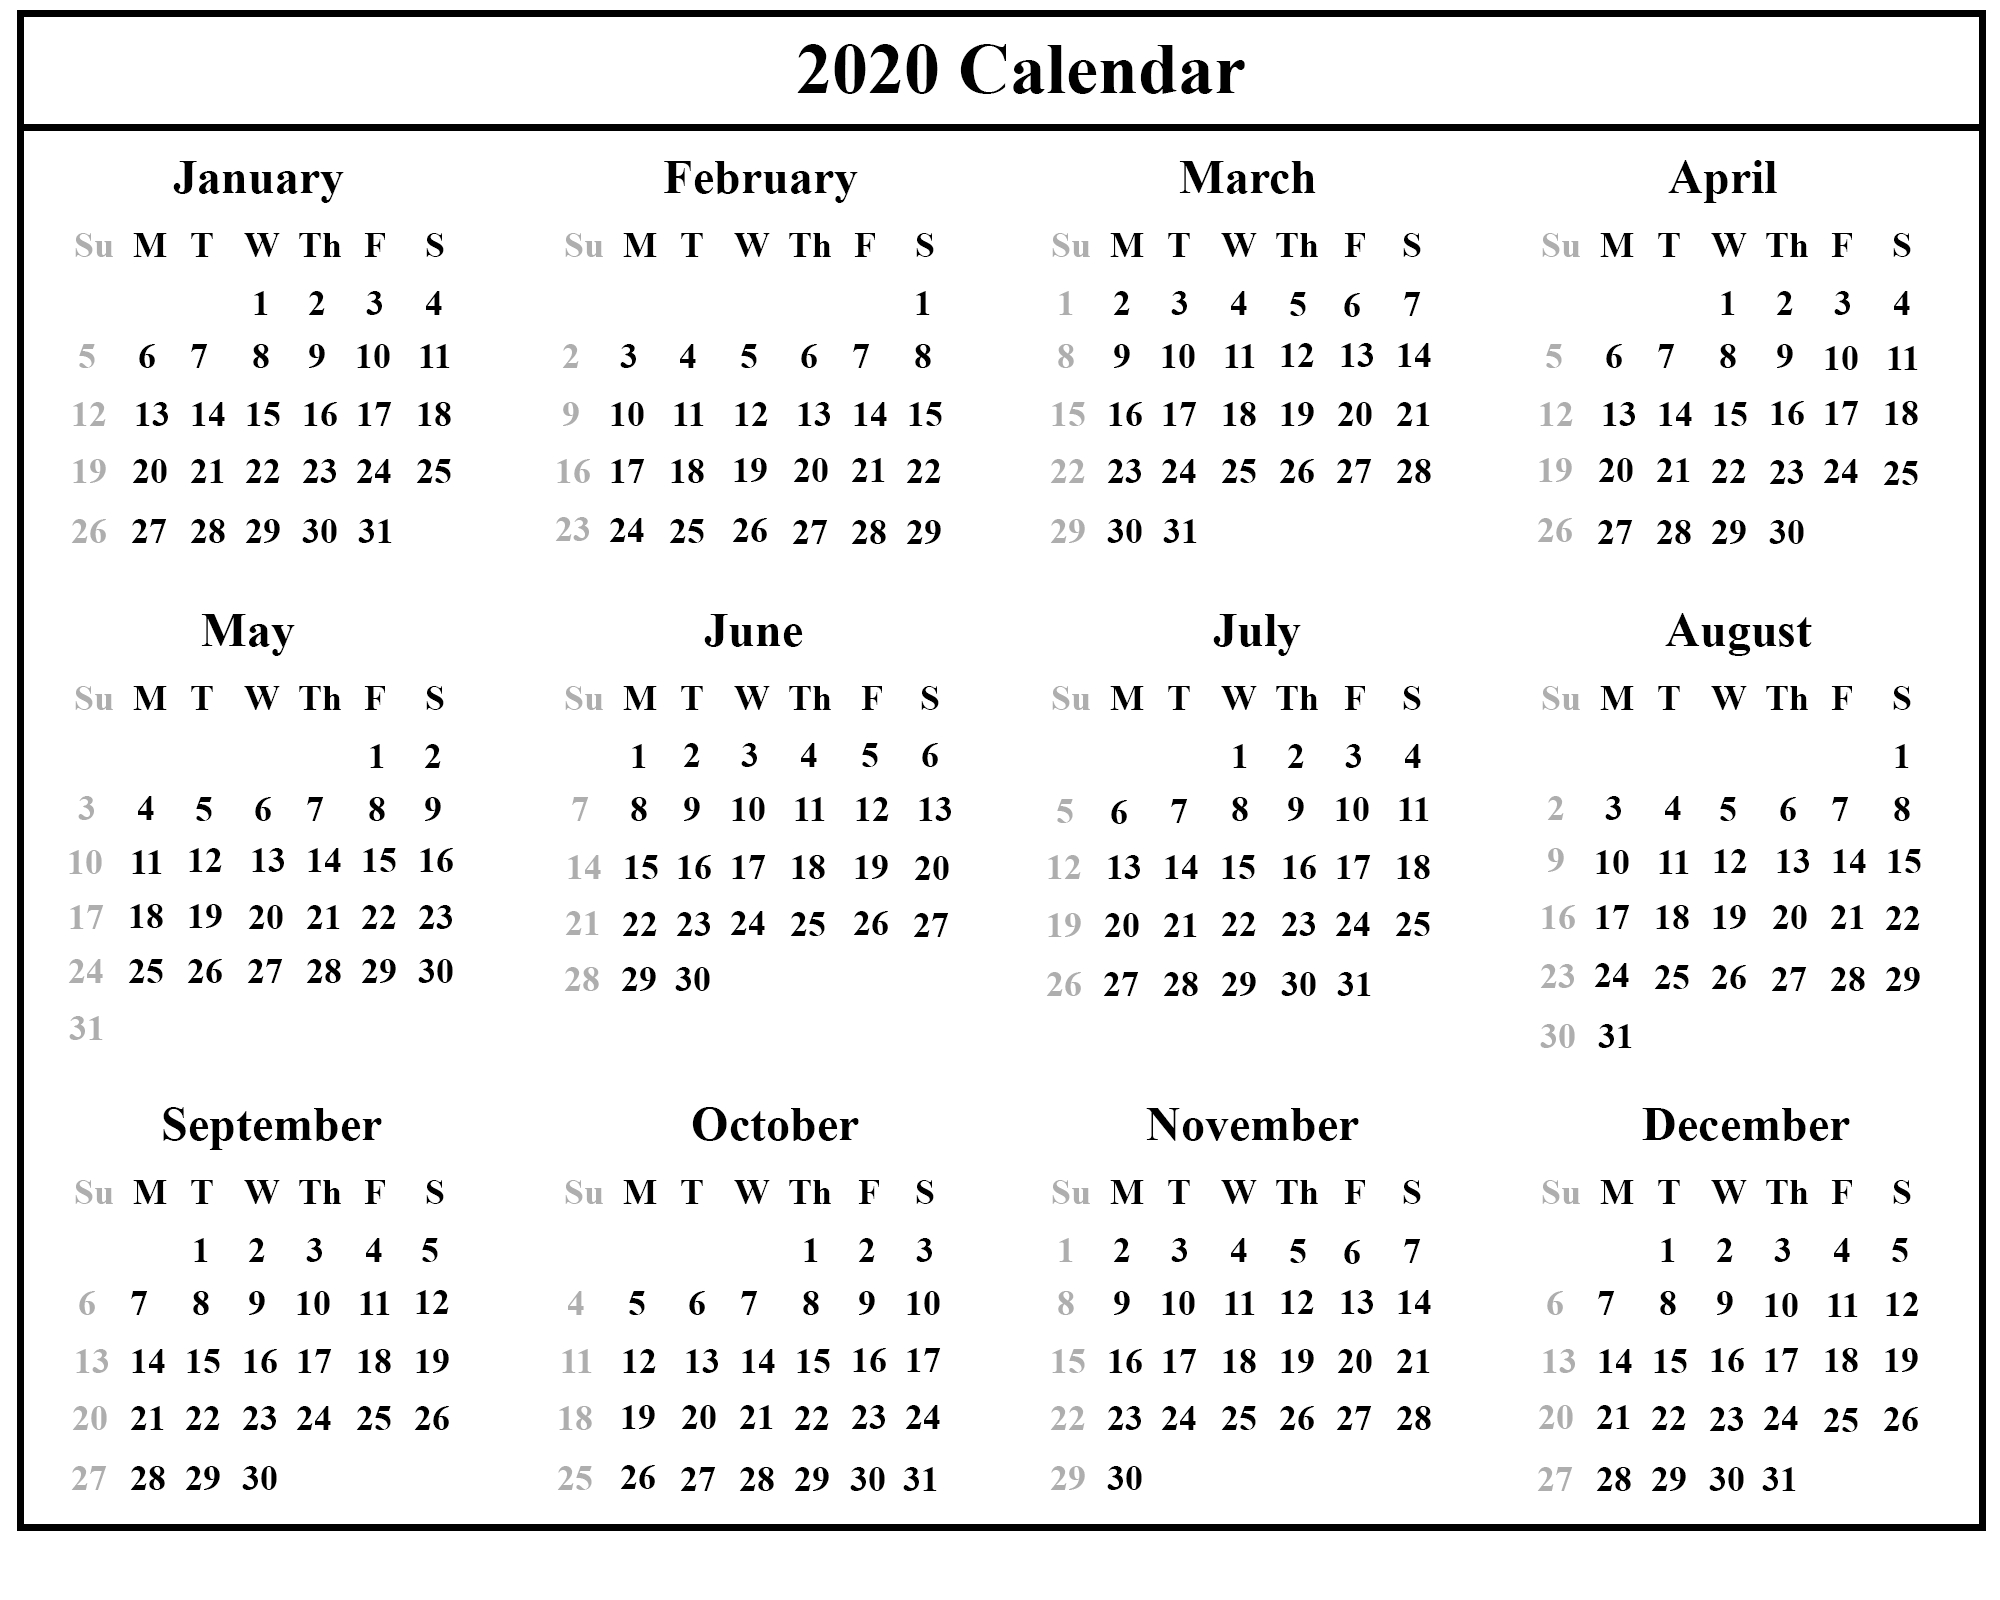 Yearly Calendar With Holidays 2020 - Colona.rsd7 Singapore 2020 Calendar With Holidays